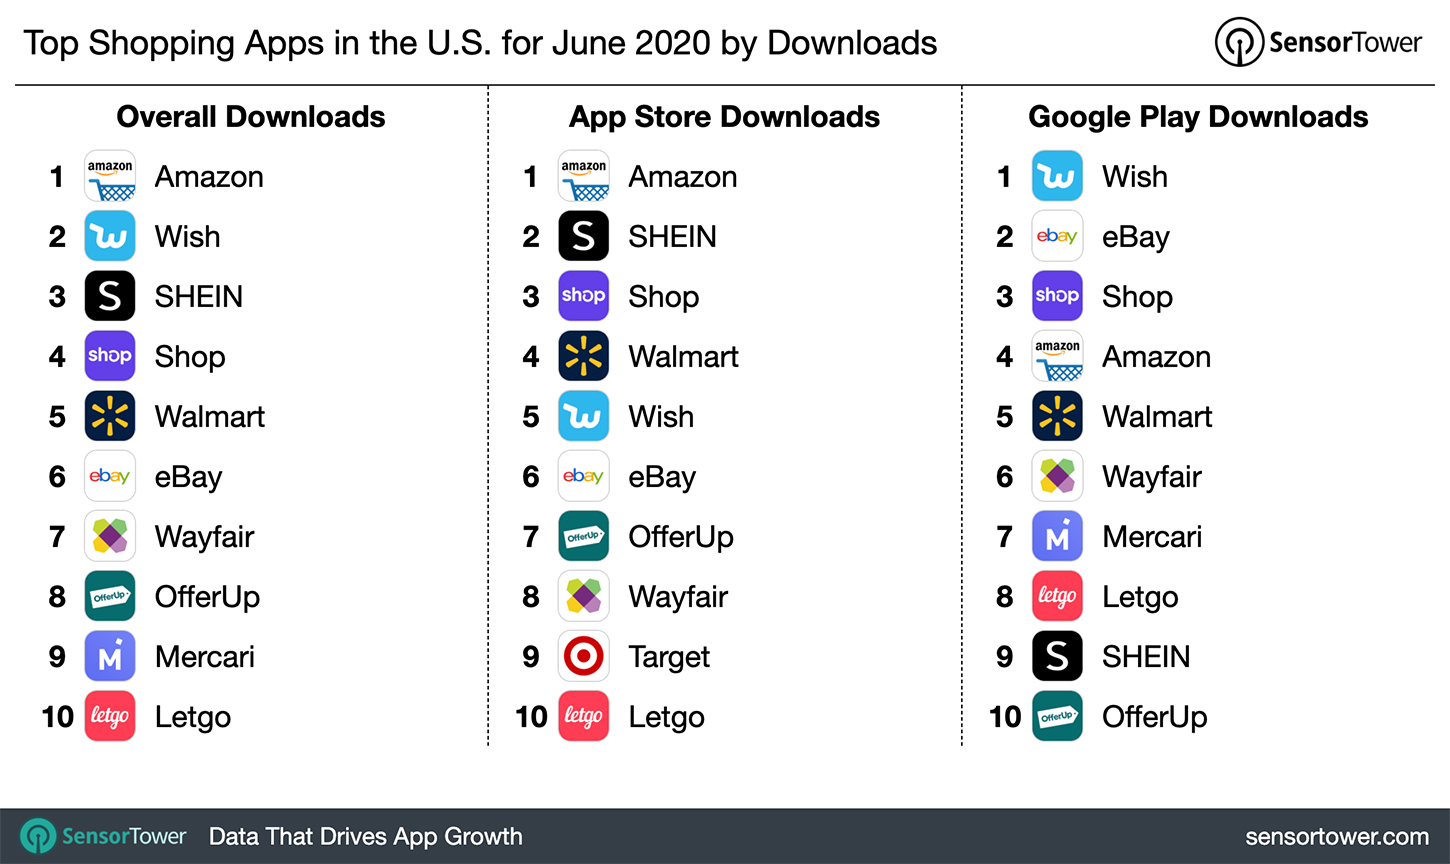 Top Shopping Apps in the U.S. for June 2020 by Downloads